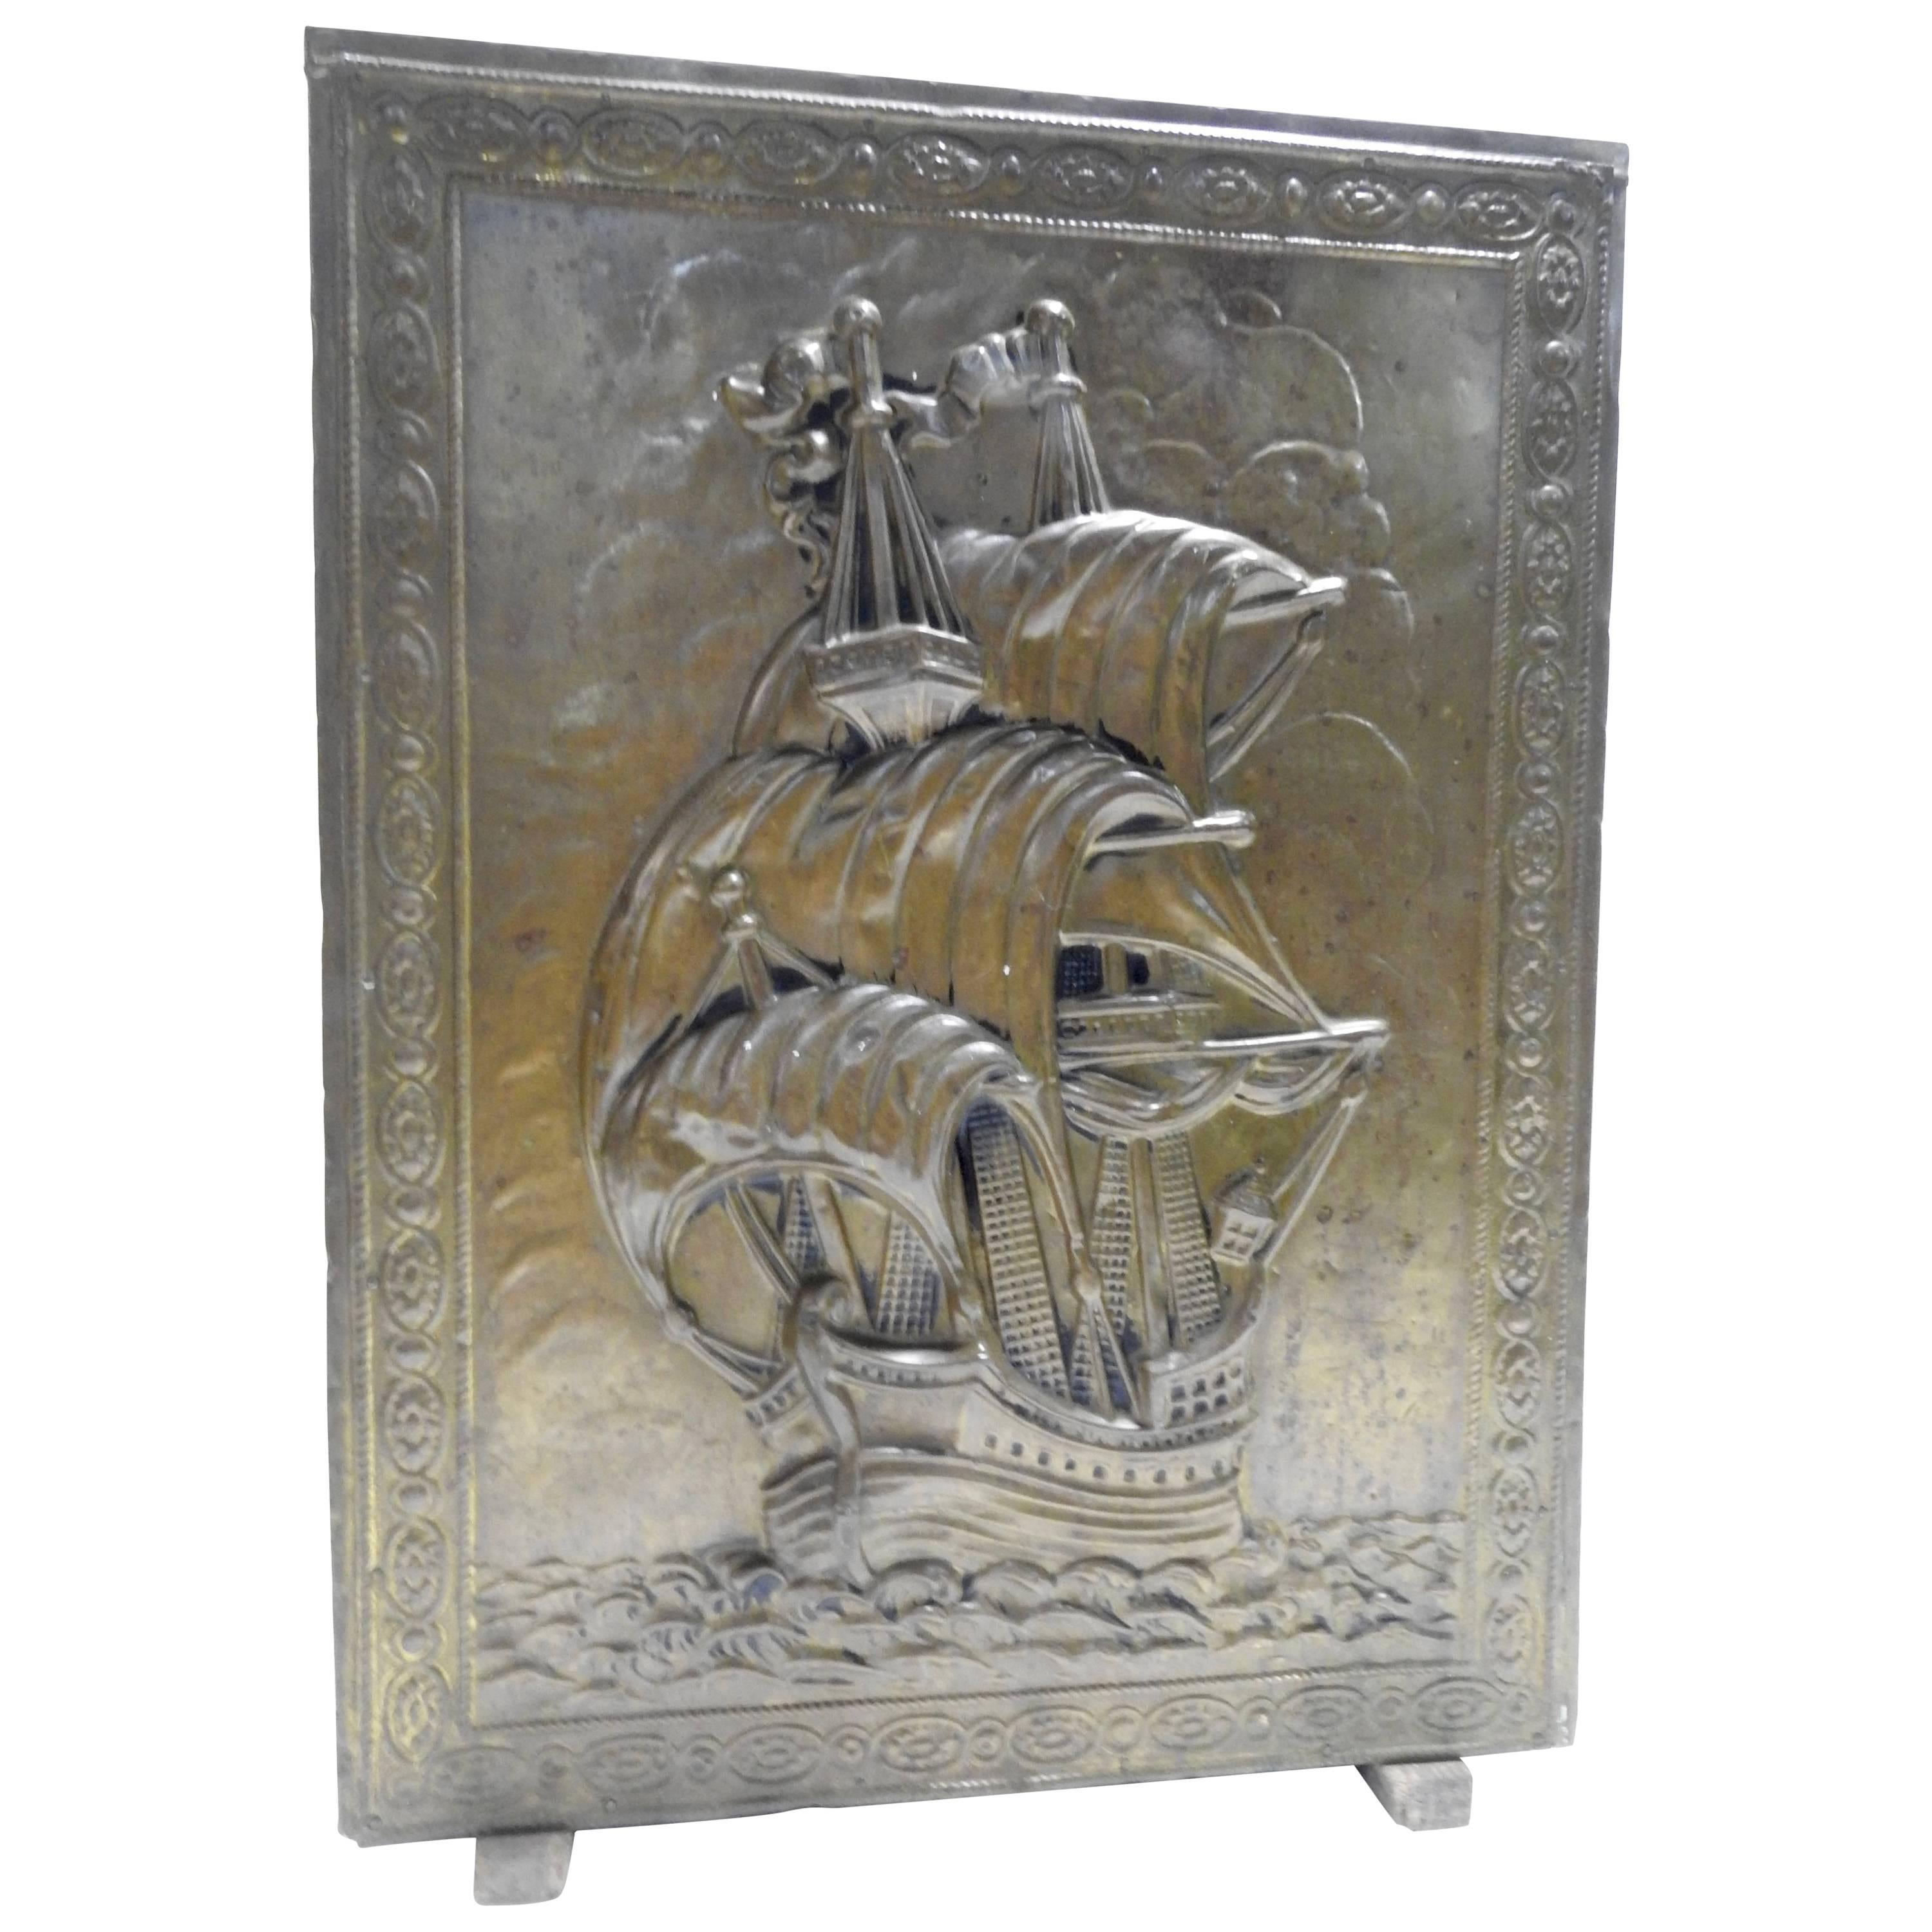 Brass and Wood Umbrella Stand with Embossed Sailing Ship